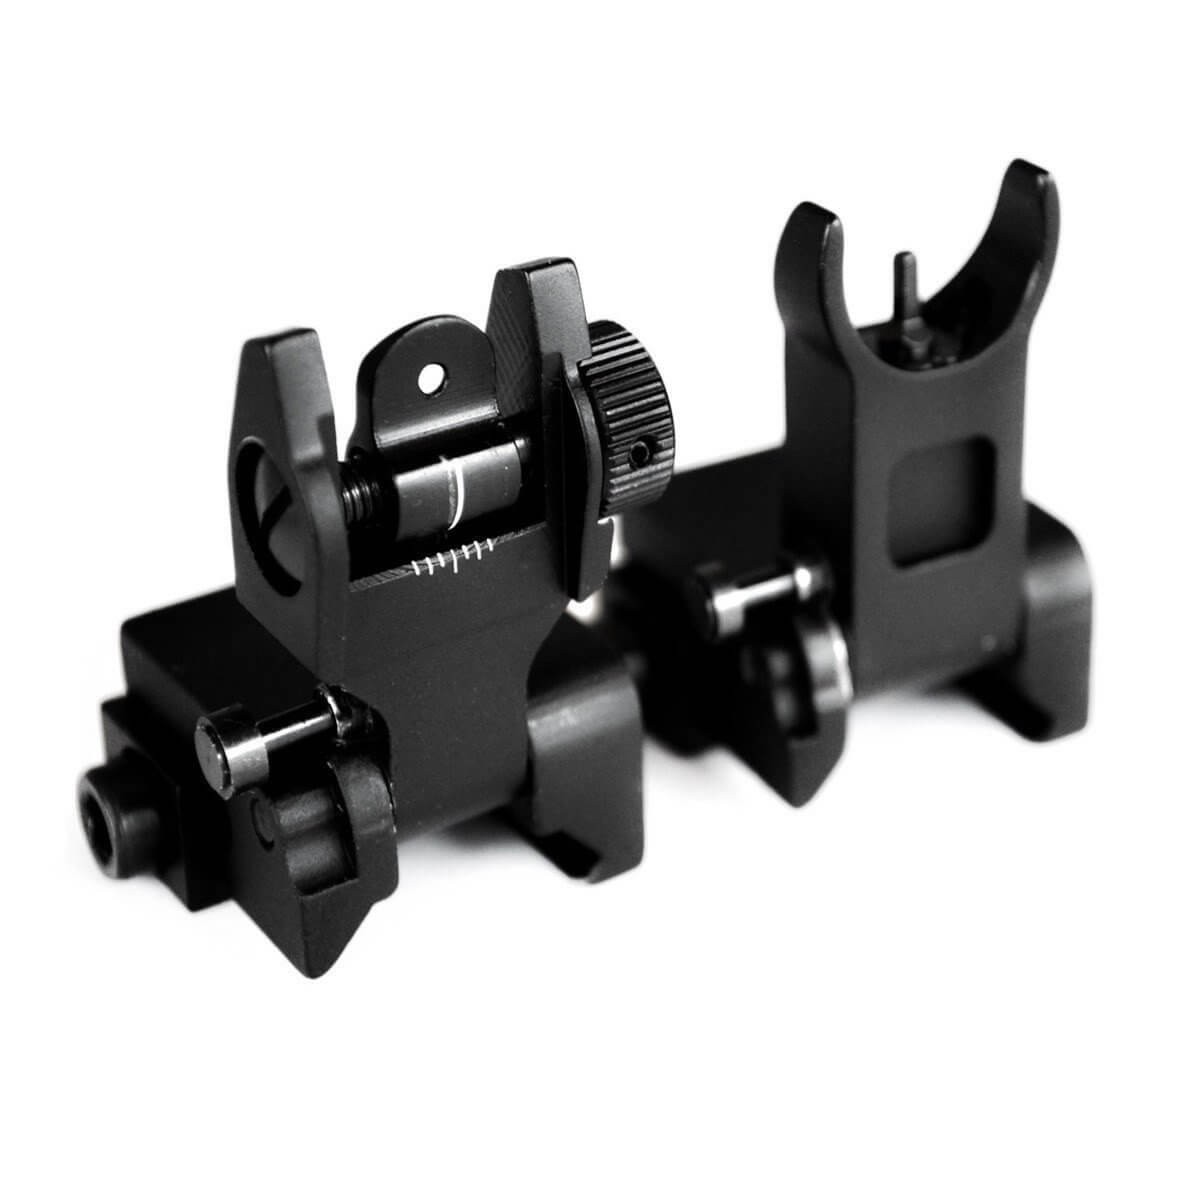 AT3™ Pro Series AR 15 Flip-Up Backup Iron Sights (BUIS) – Front & Rear Set – Same Plane – IS-09